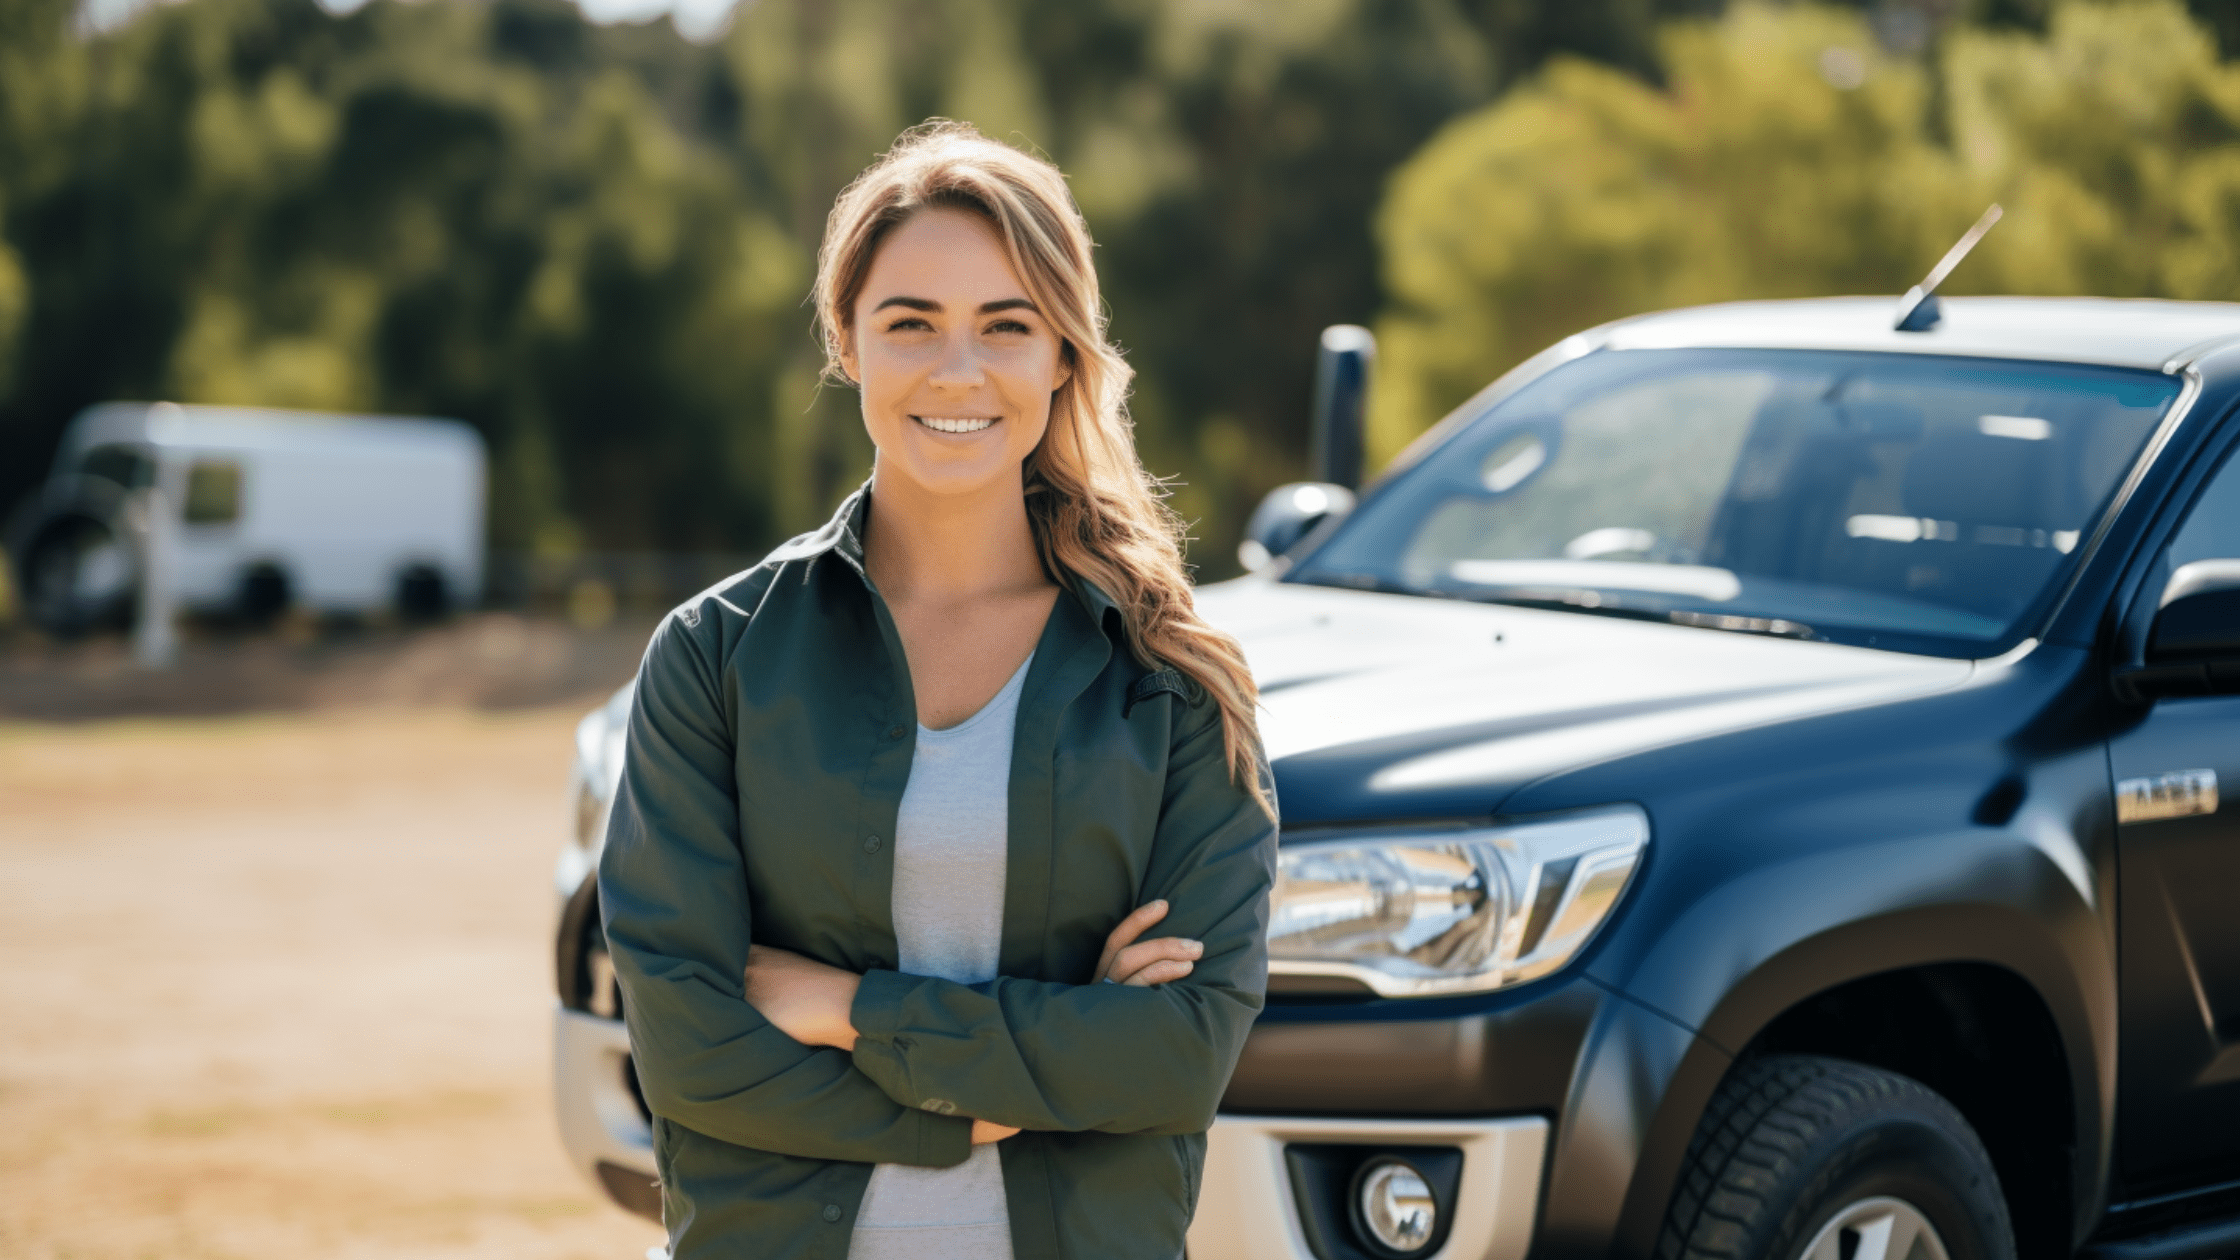 Confident woman in Australia standing next to her financed Ute, showcasing the power and versatility of her vehicle choice.